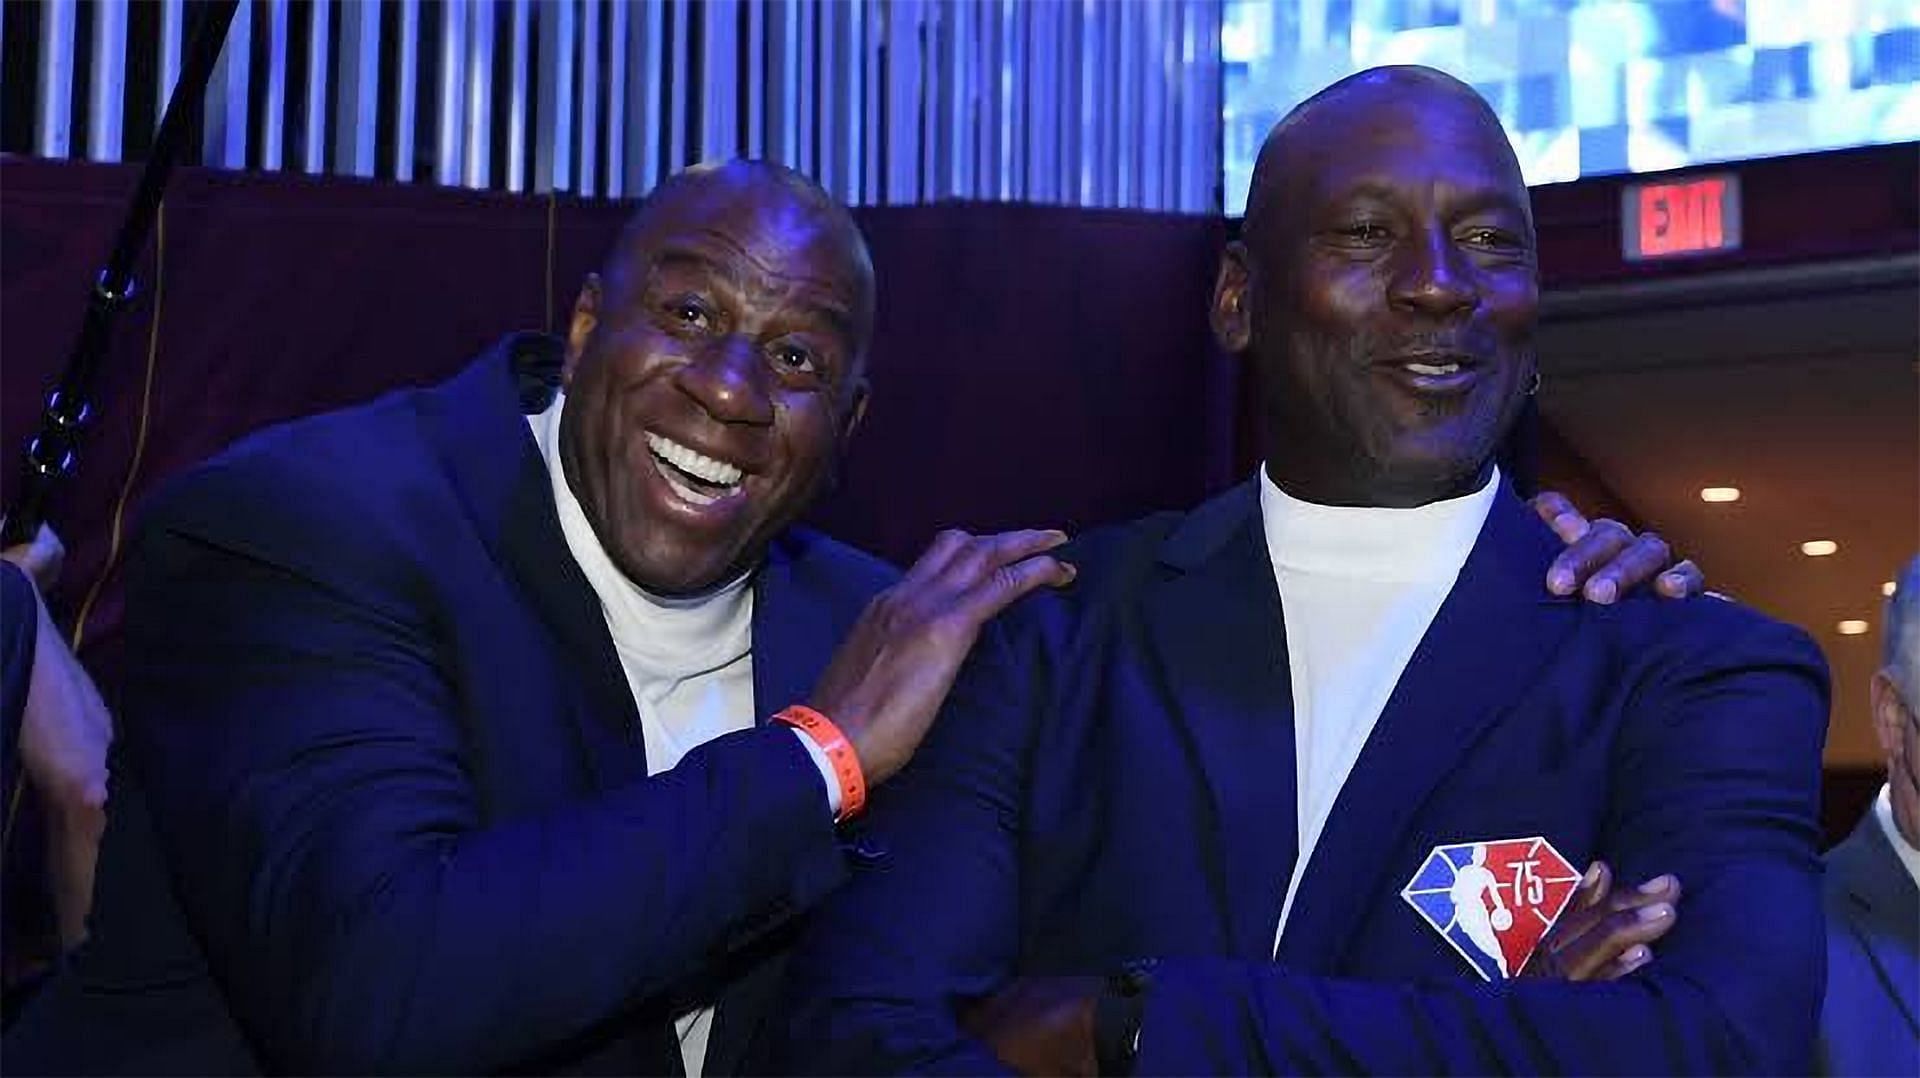 What did Magic Johnson say about his friendship with Michael Jordan?